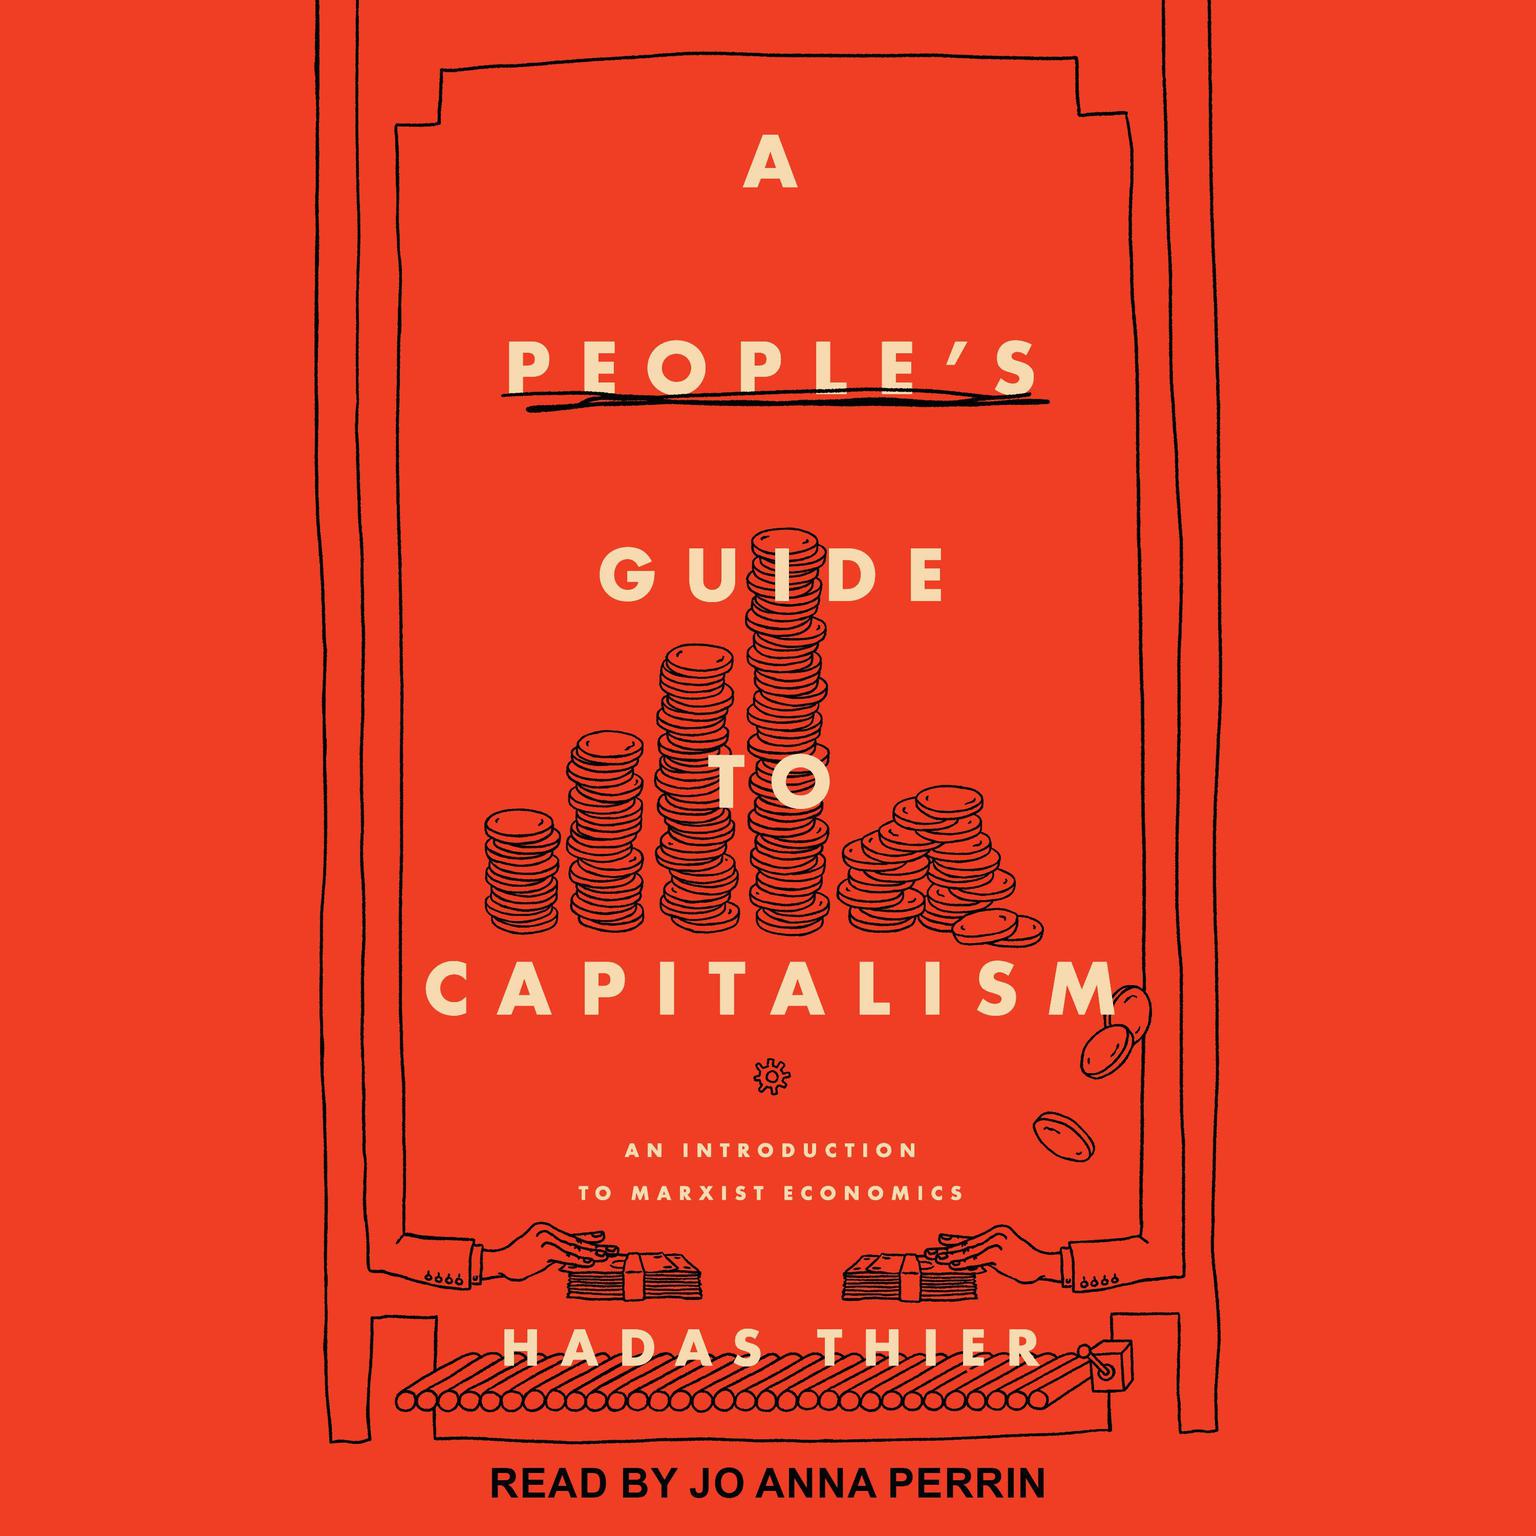 A Peoples Guide to Capitalism: An Introduction to Marxist Economics Audiobook, by Hadas Their